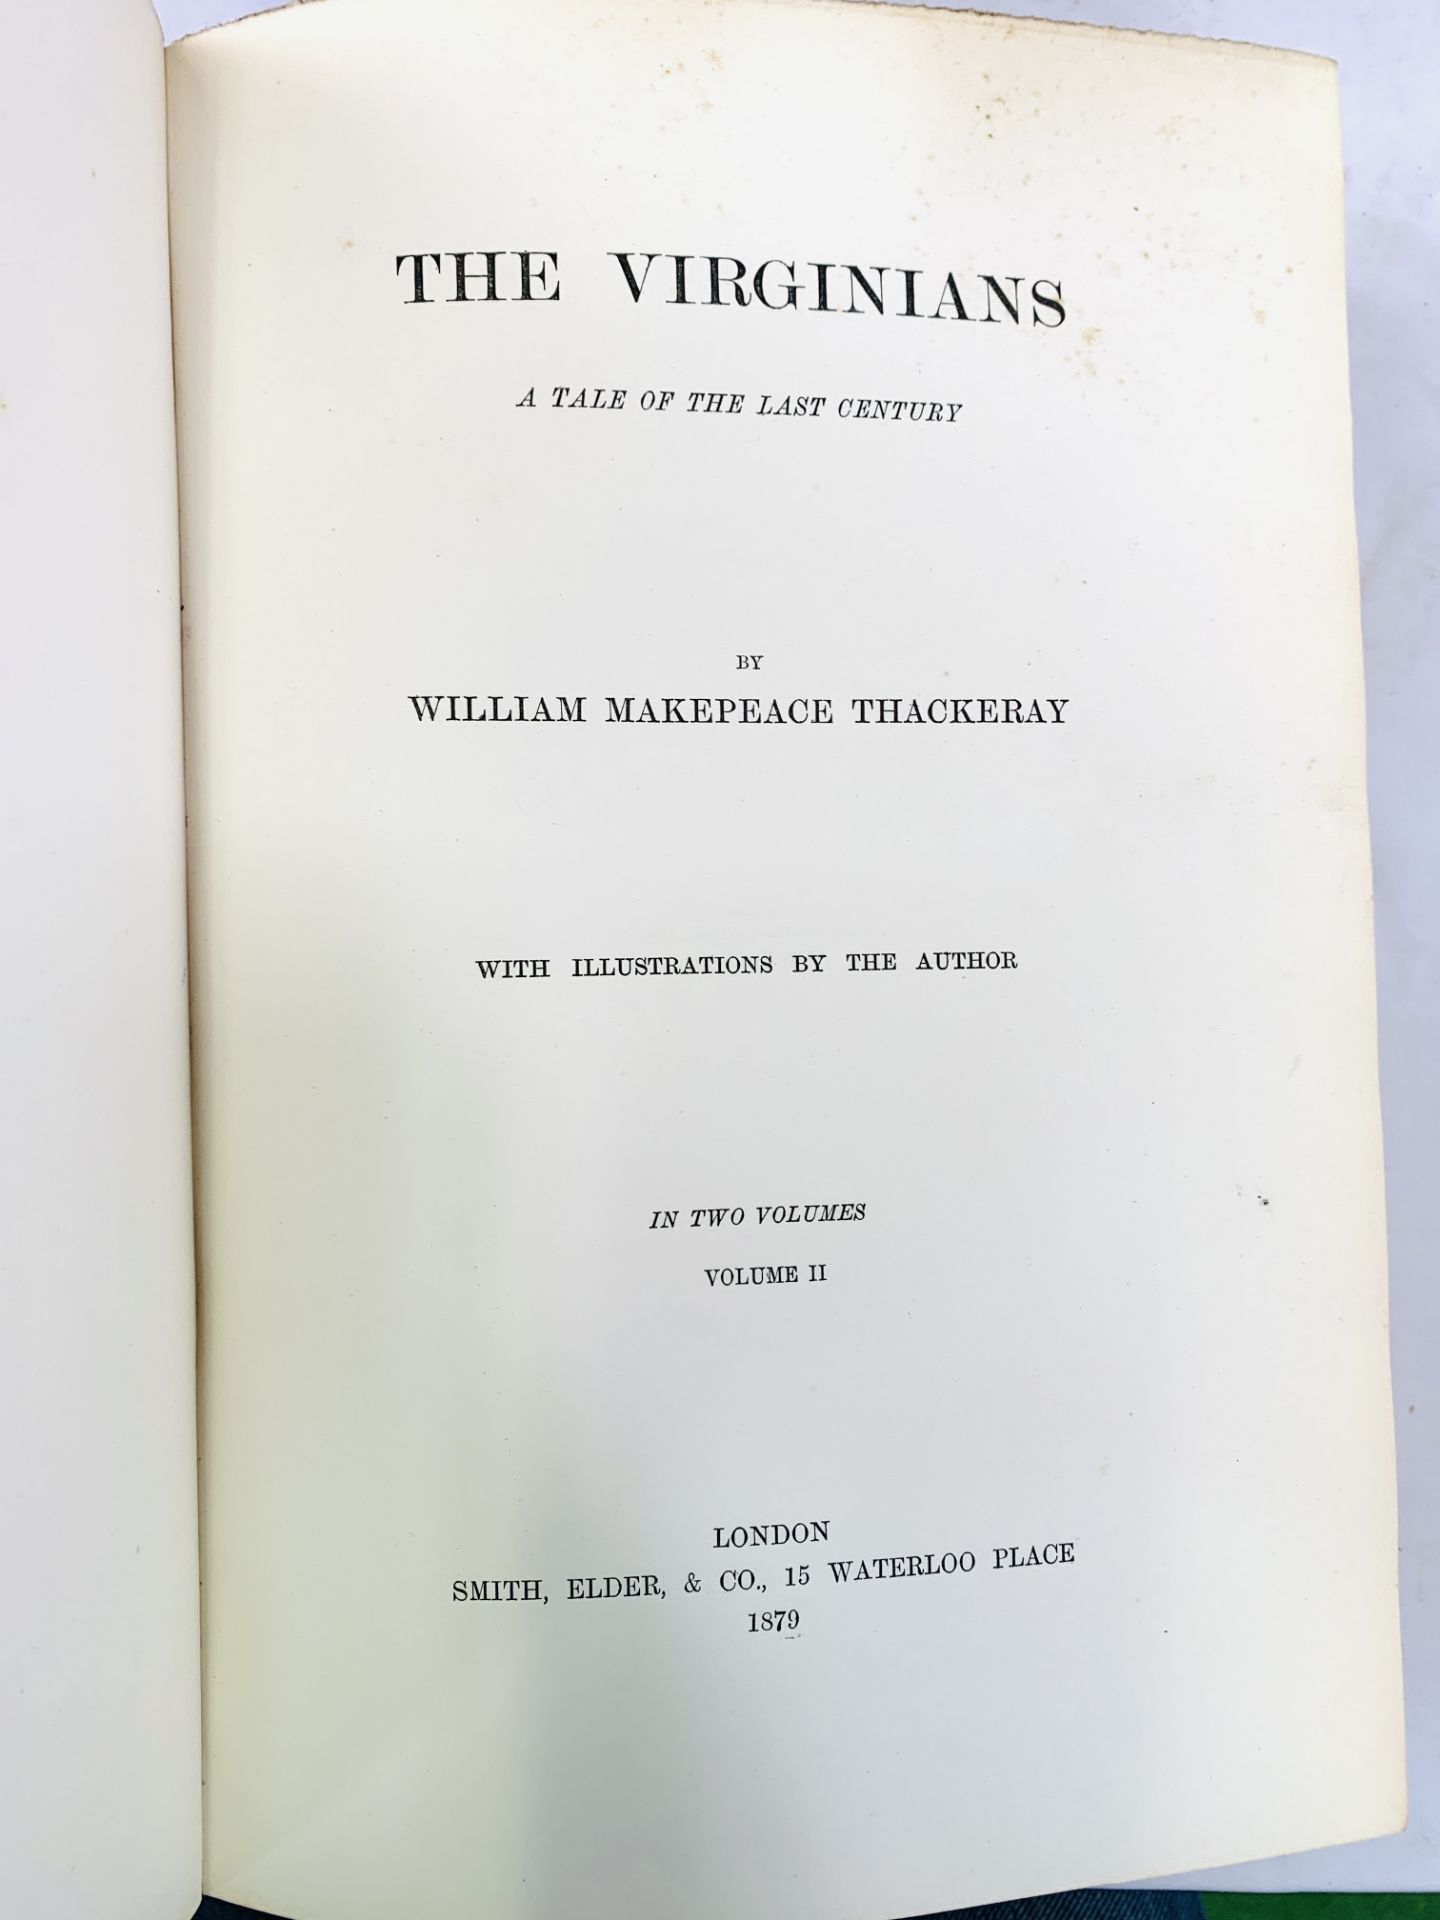 The Works of W. M. Thackeray: 'The Virginians', volumes 1 and 2, limited edition, published 1879 - Image 3 of 4